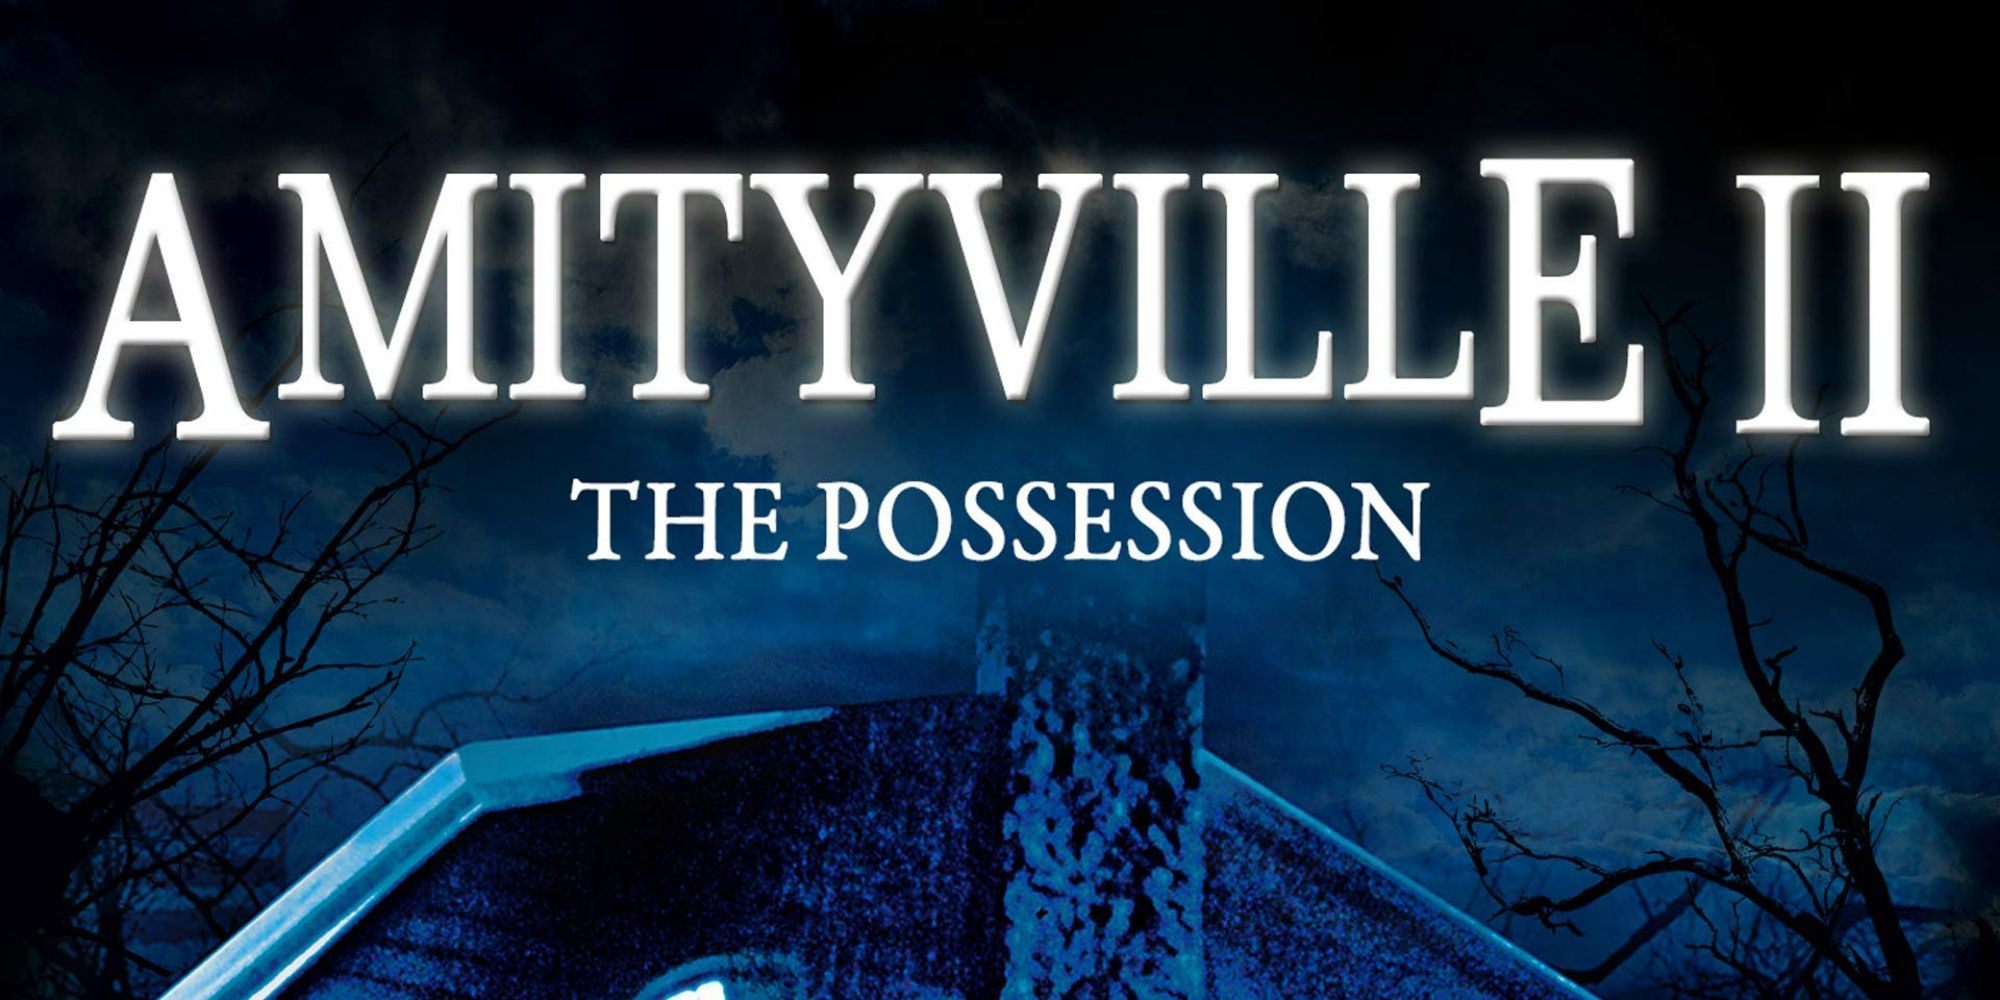 The title card for Amityville II: The Possession